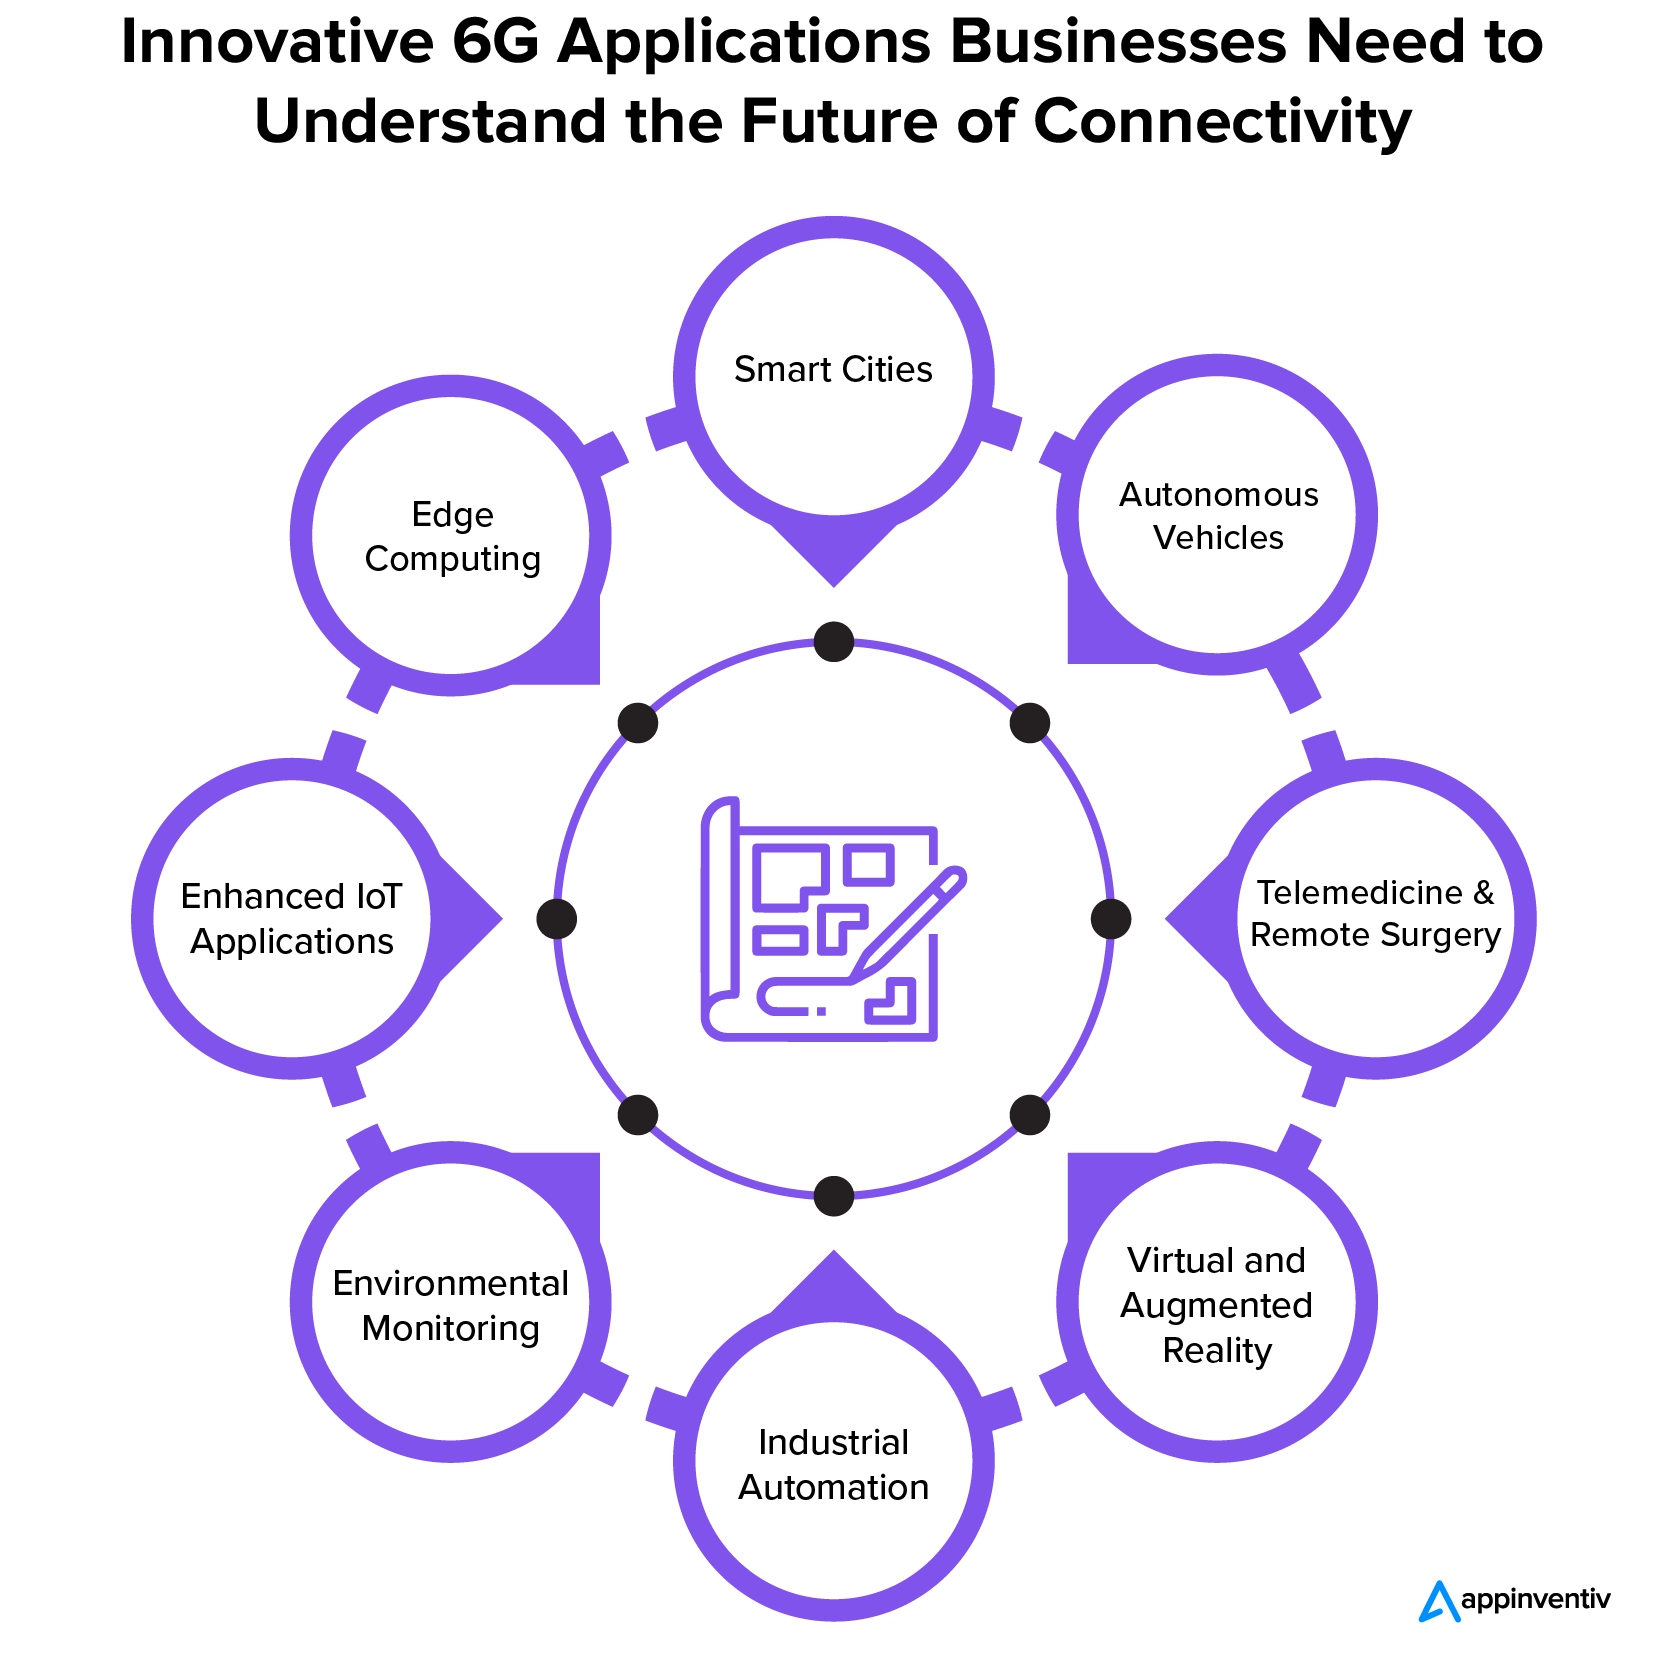 Innovative 6G Application Businesses Need to Understand the Future of Connectivity